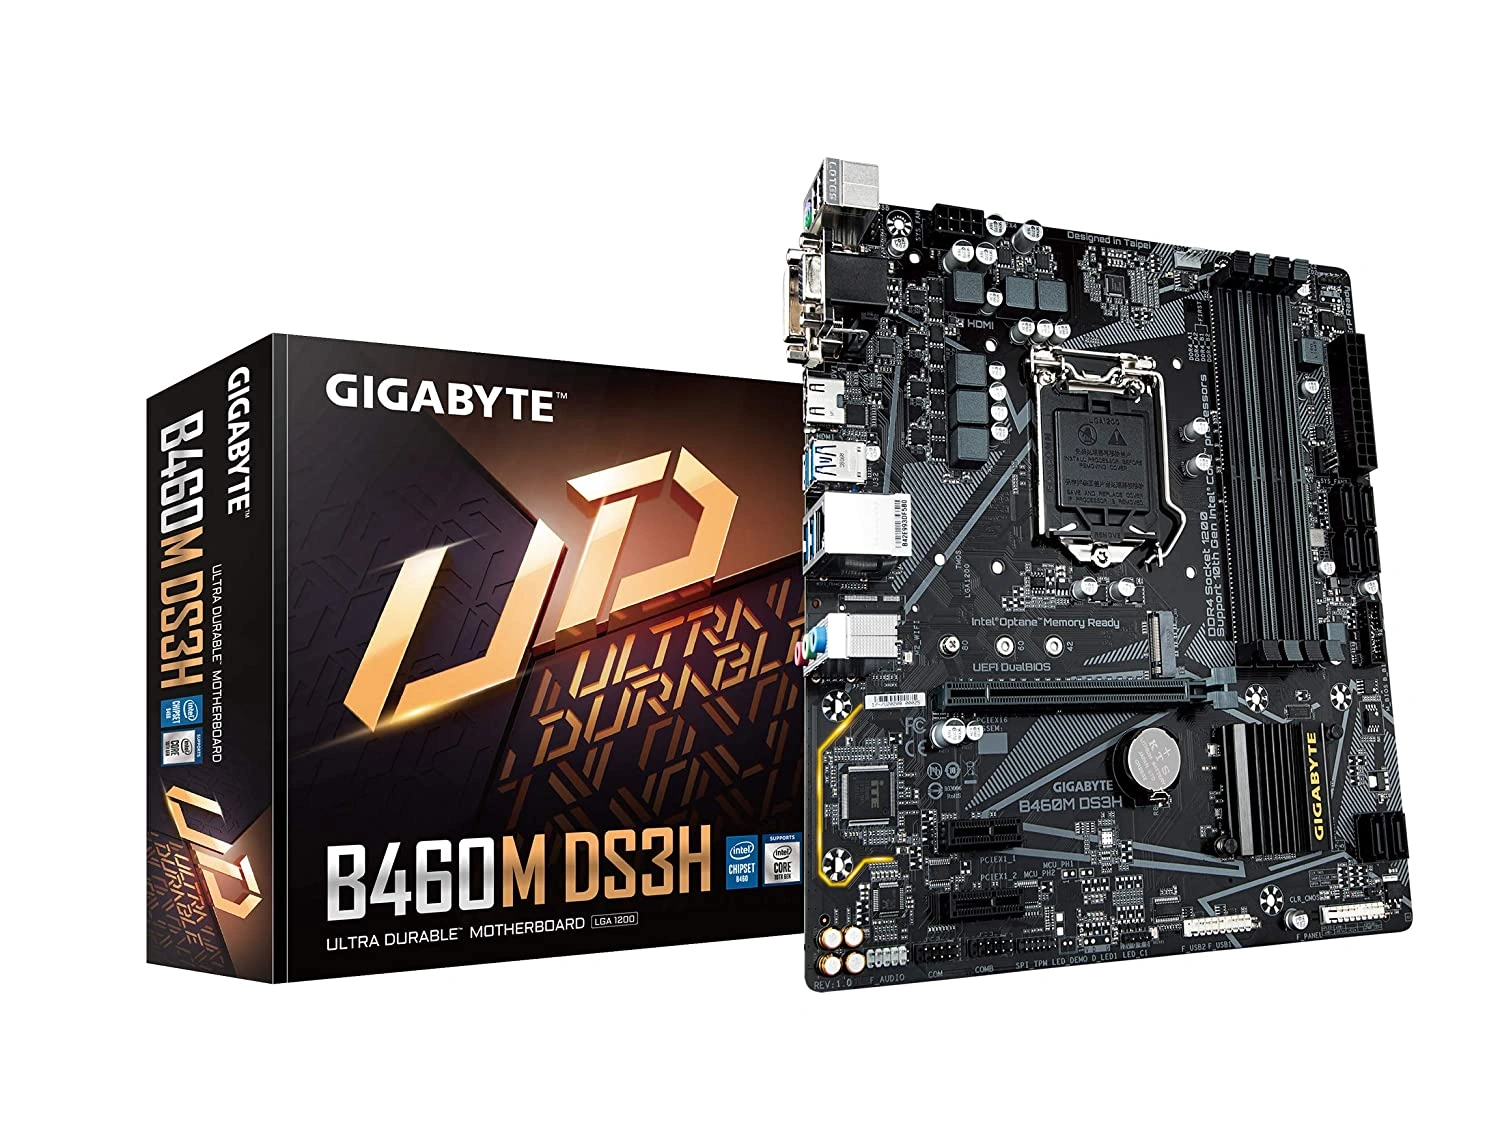 GIGABYTE B460M DS3H Ultra Durable Motherboard with GIGABYTE 8118 Gaming LAN, PCIe Gen3 x4 M.2, 7 Colors RGB LED Strips Support-Gigabyte-B460M-DS3H